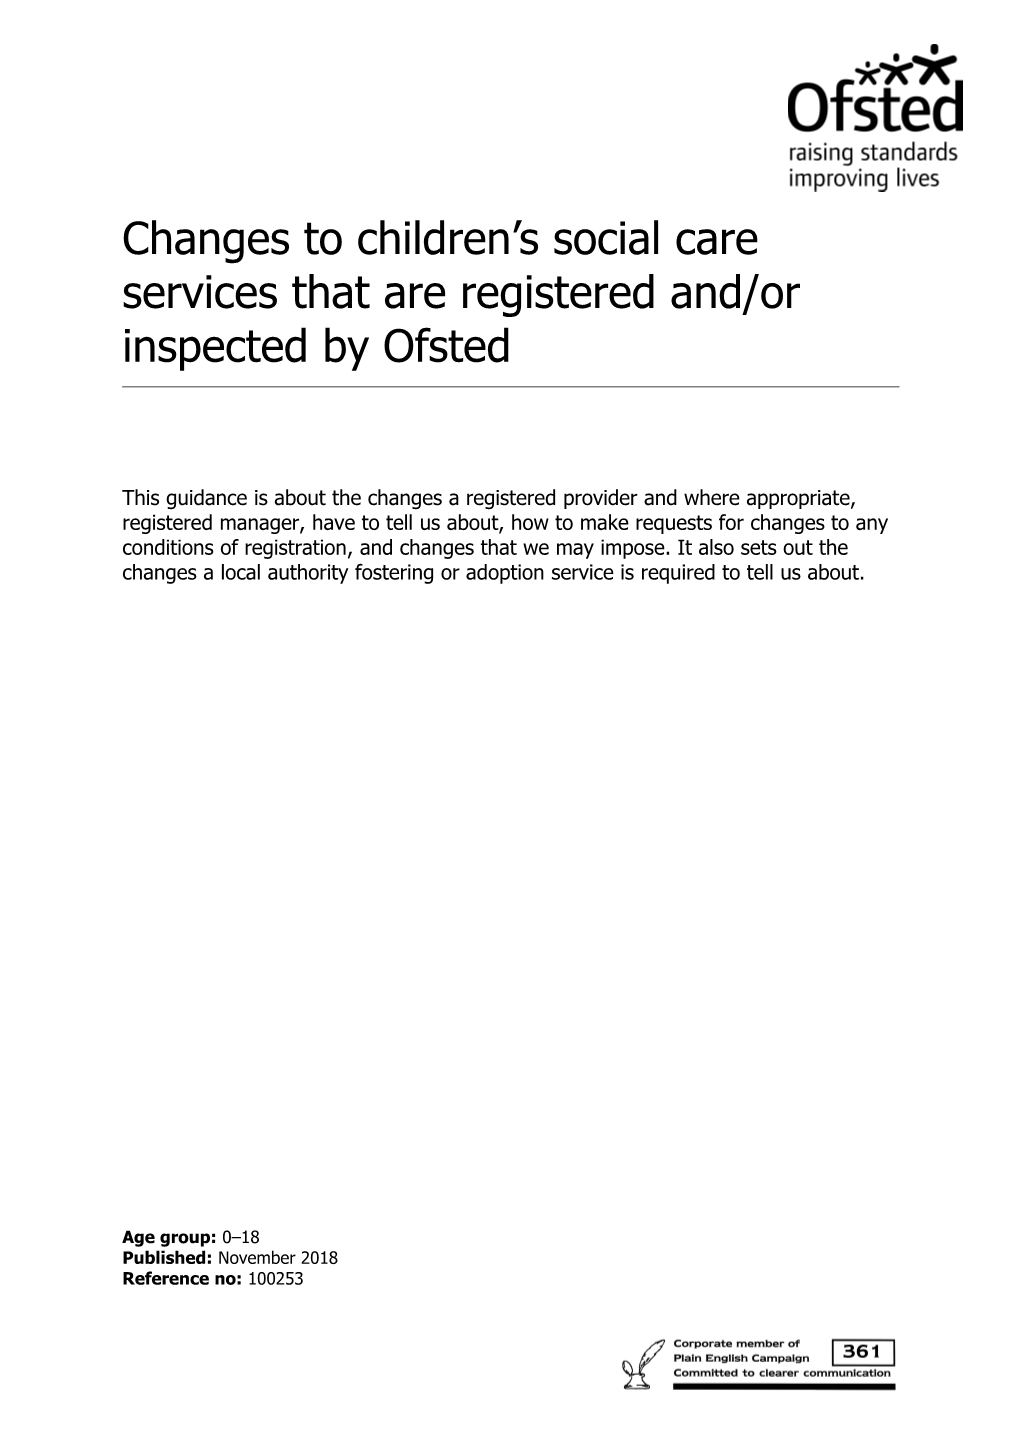 Ofsted Guidance: Changes to Children's Social Care Services